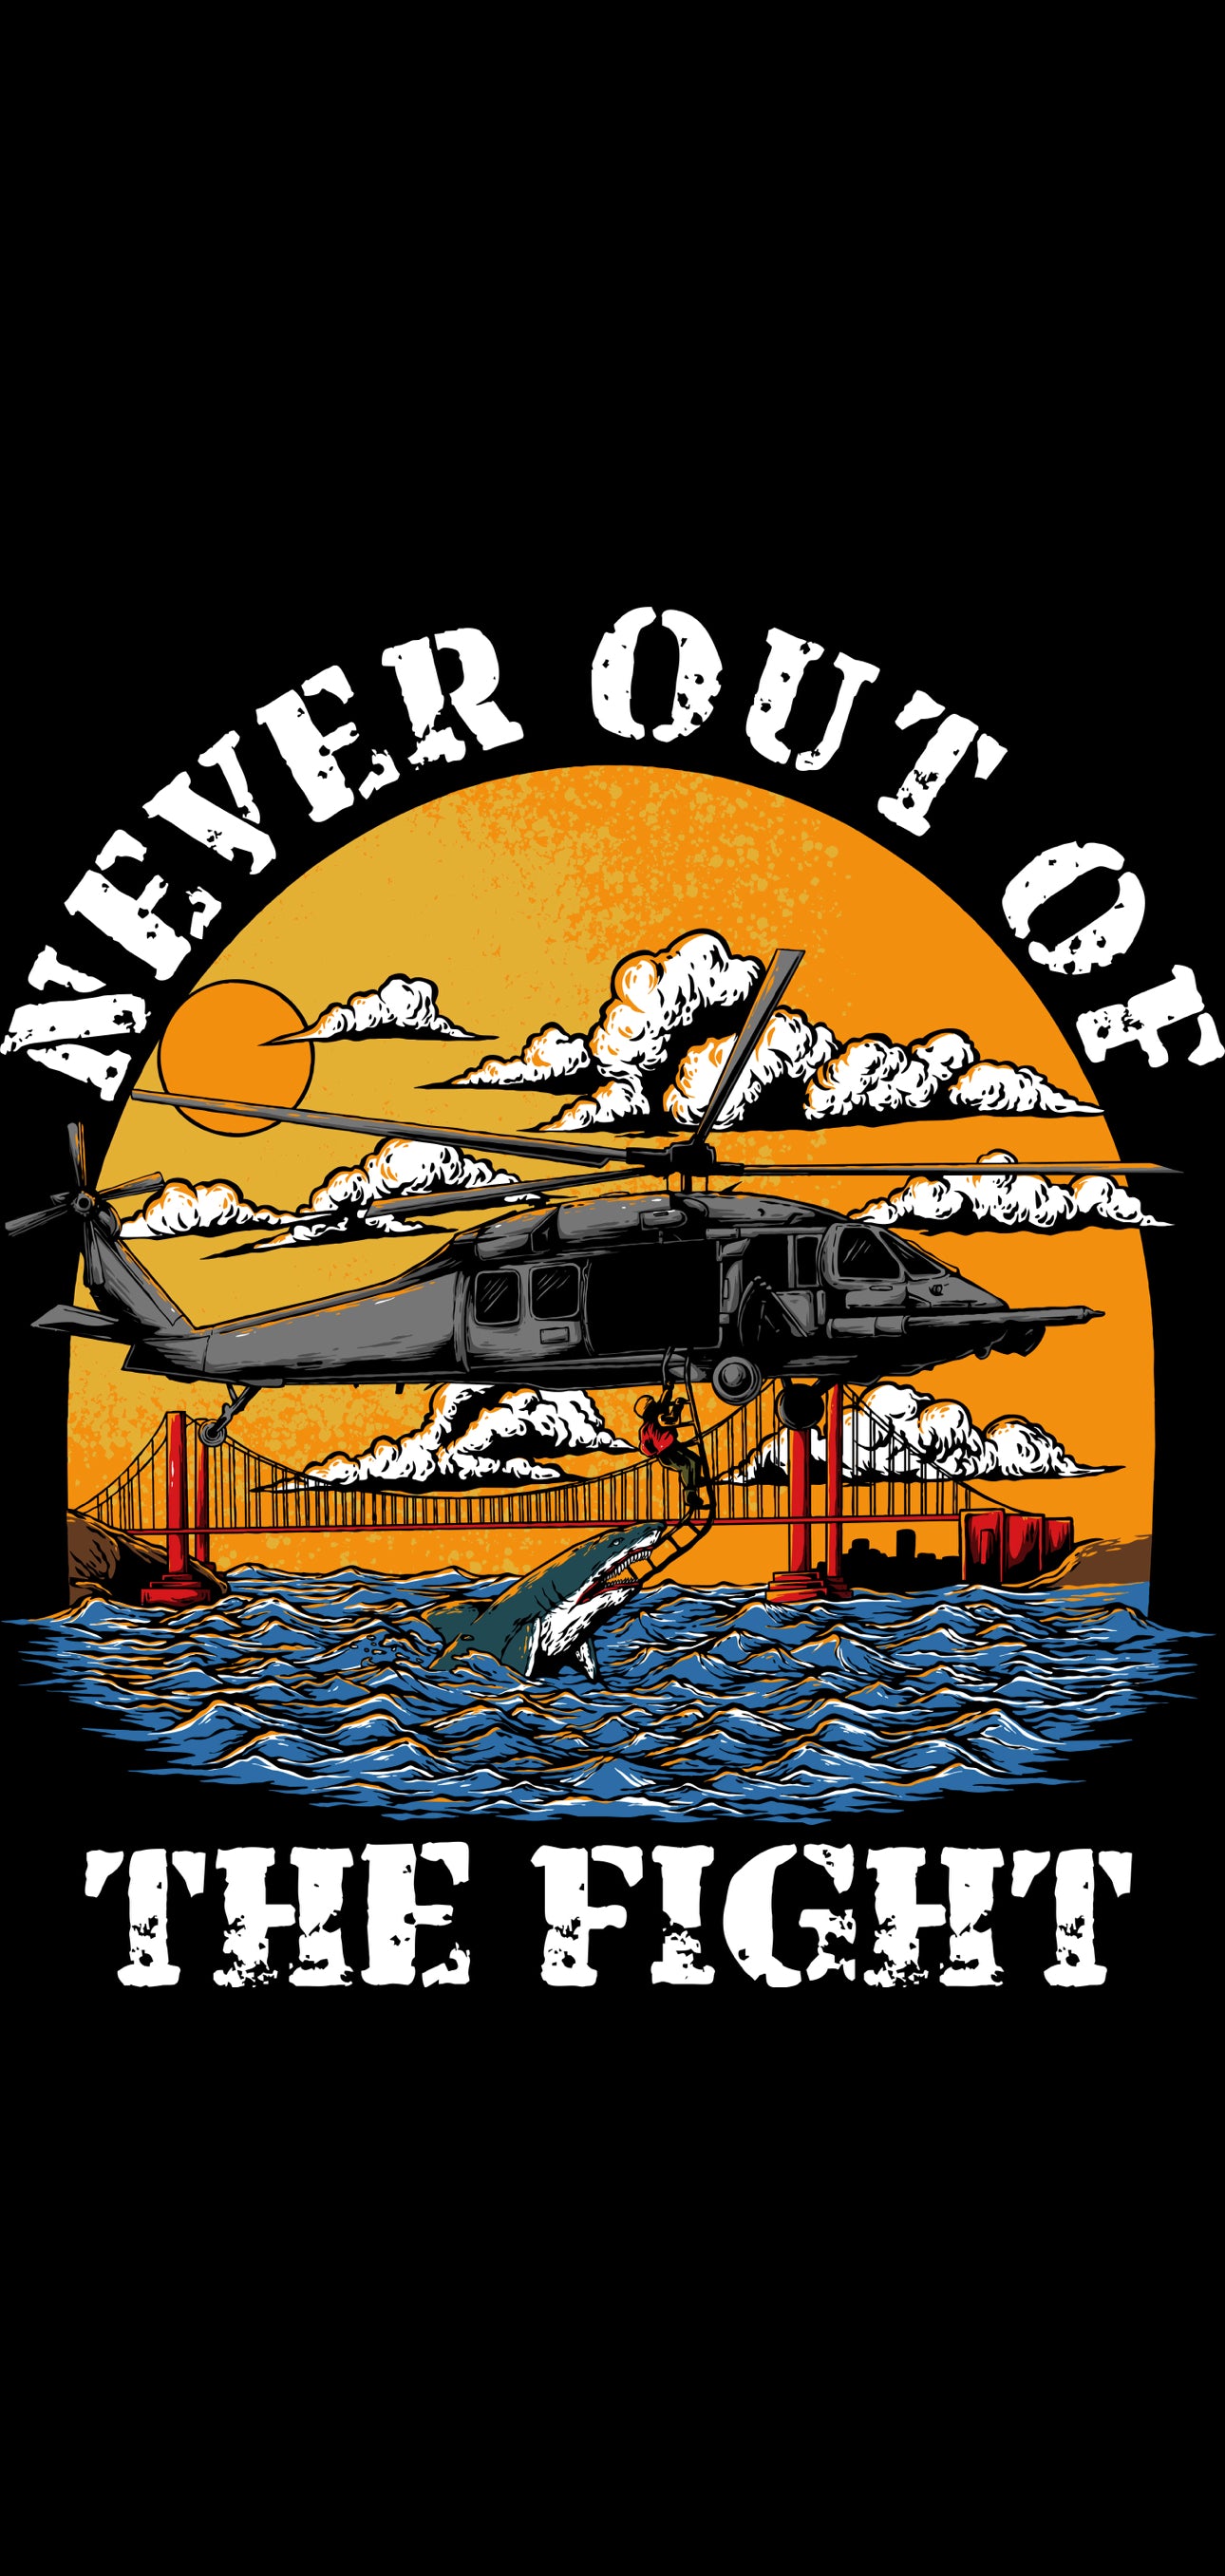 Never Out Patch